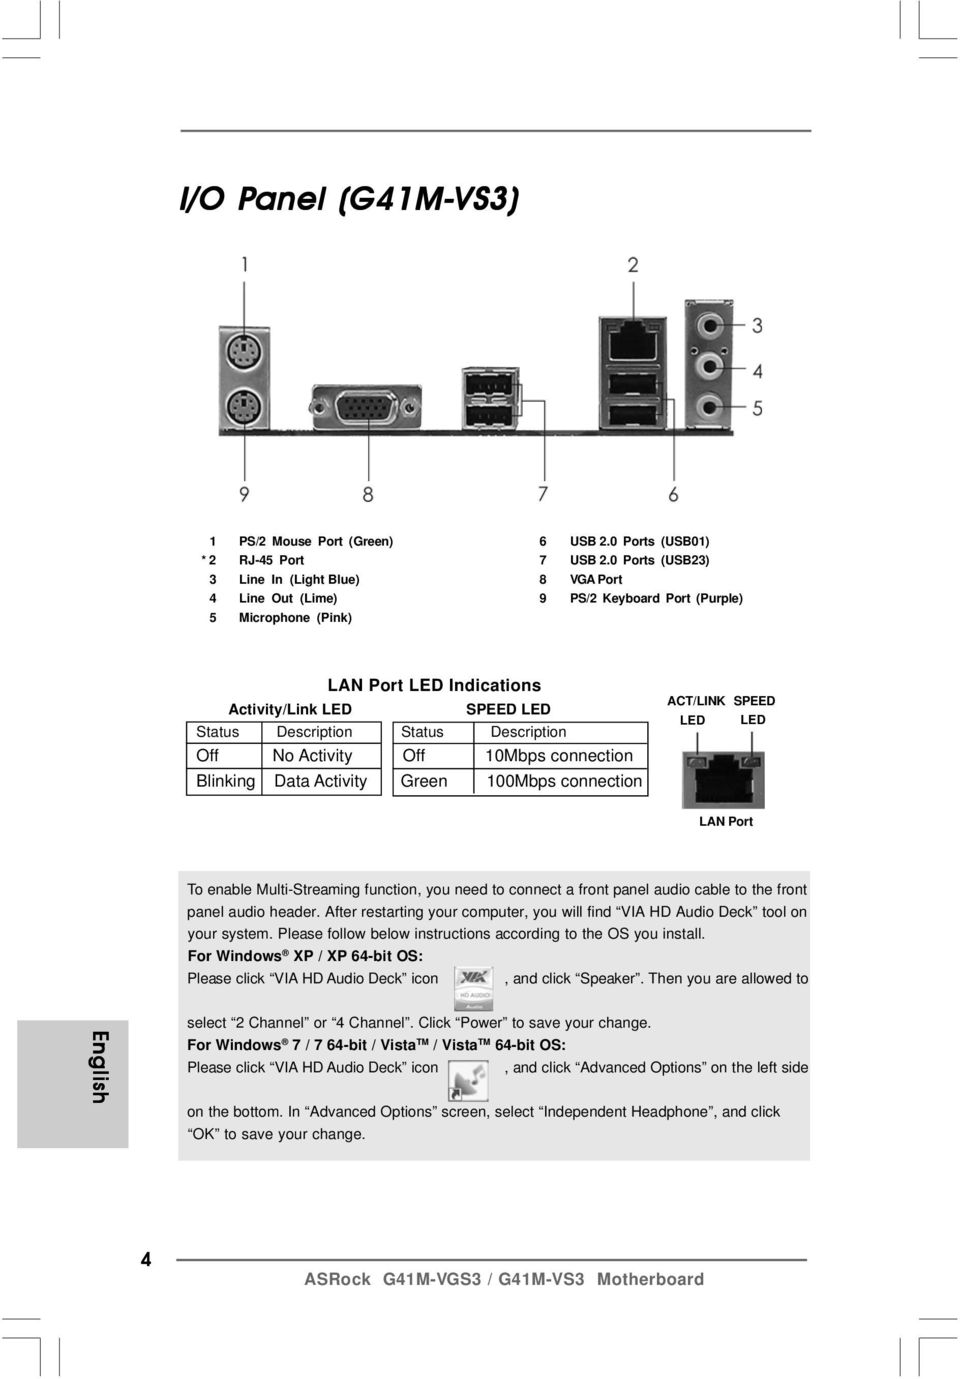 Description Off No Activity Off 10Mbps connection Blinking Data Activity Green 100Mbps connection ACT/LINK SPEED LED LED LAN Port To enable Multi-Streaming function, you need to connect a front panel